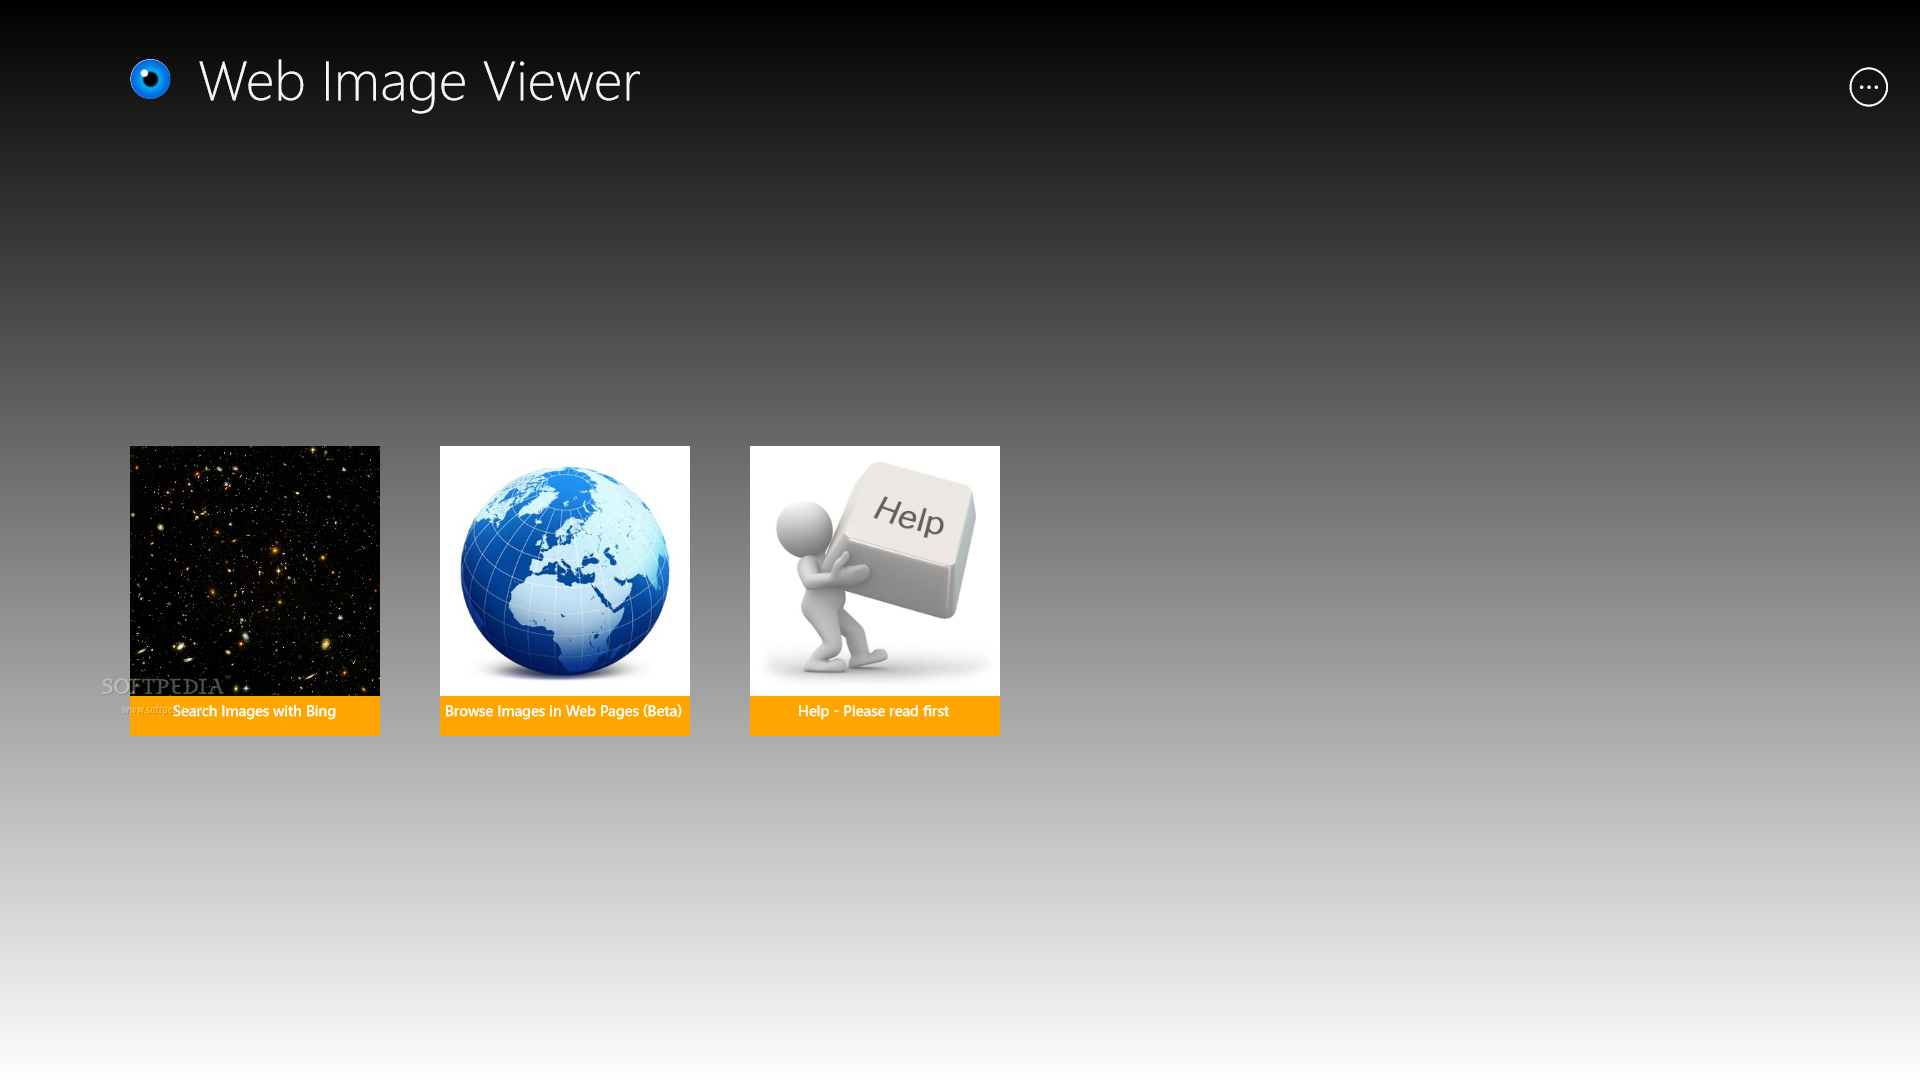 Web Image Viewer for Windows 8